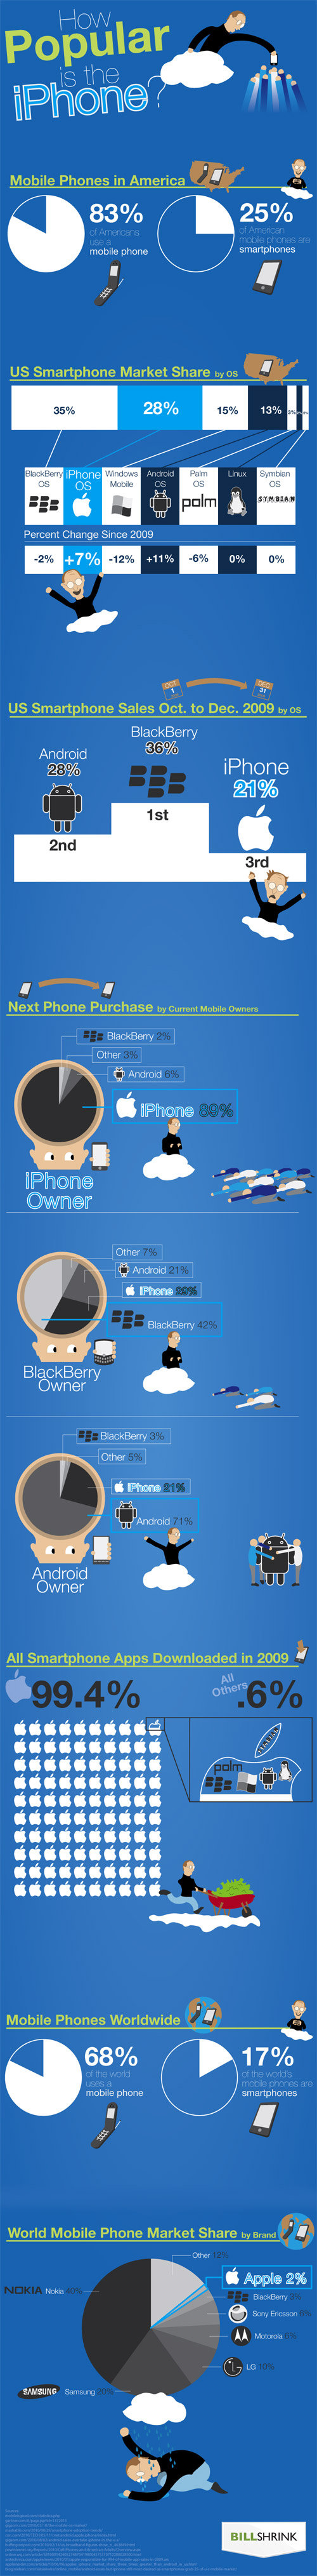 How popular is the iPhone?. This tells you the truth...&lt;br /&gt; Any positive thumbs up amount for more!. Mobile Phones in America _ C meme phone smartphones